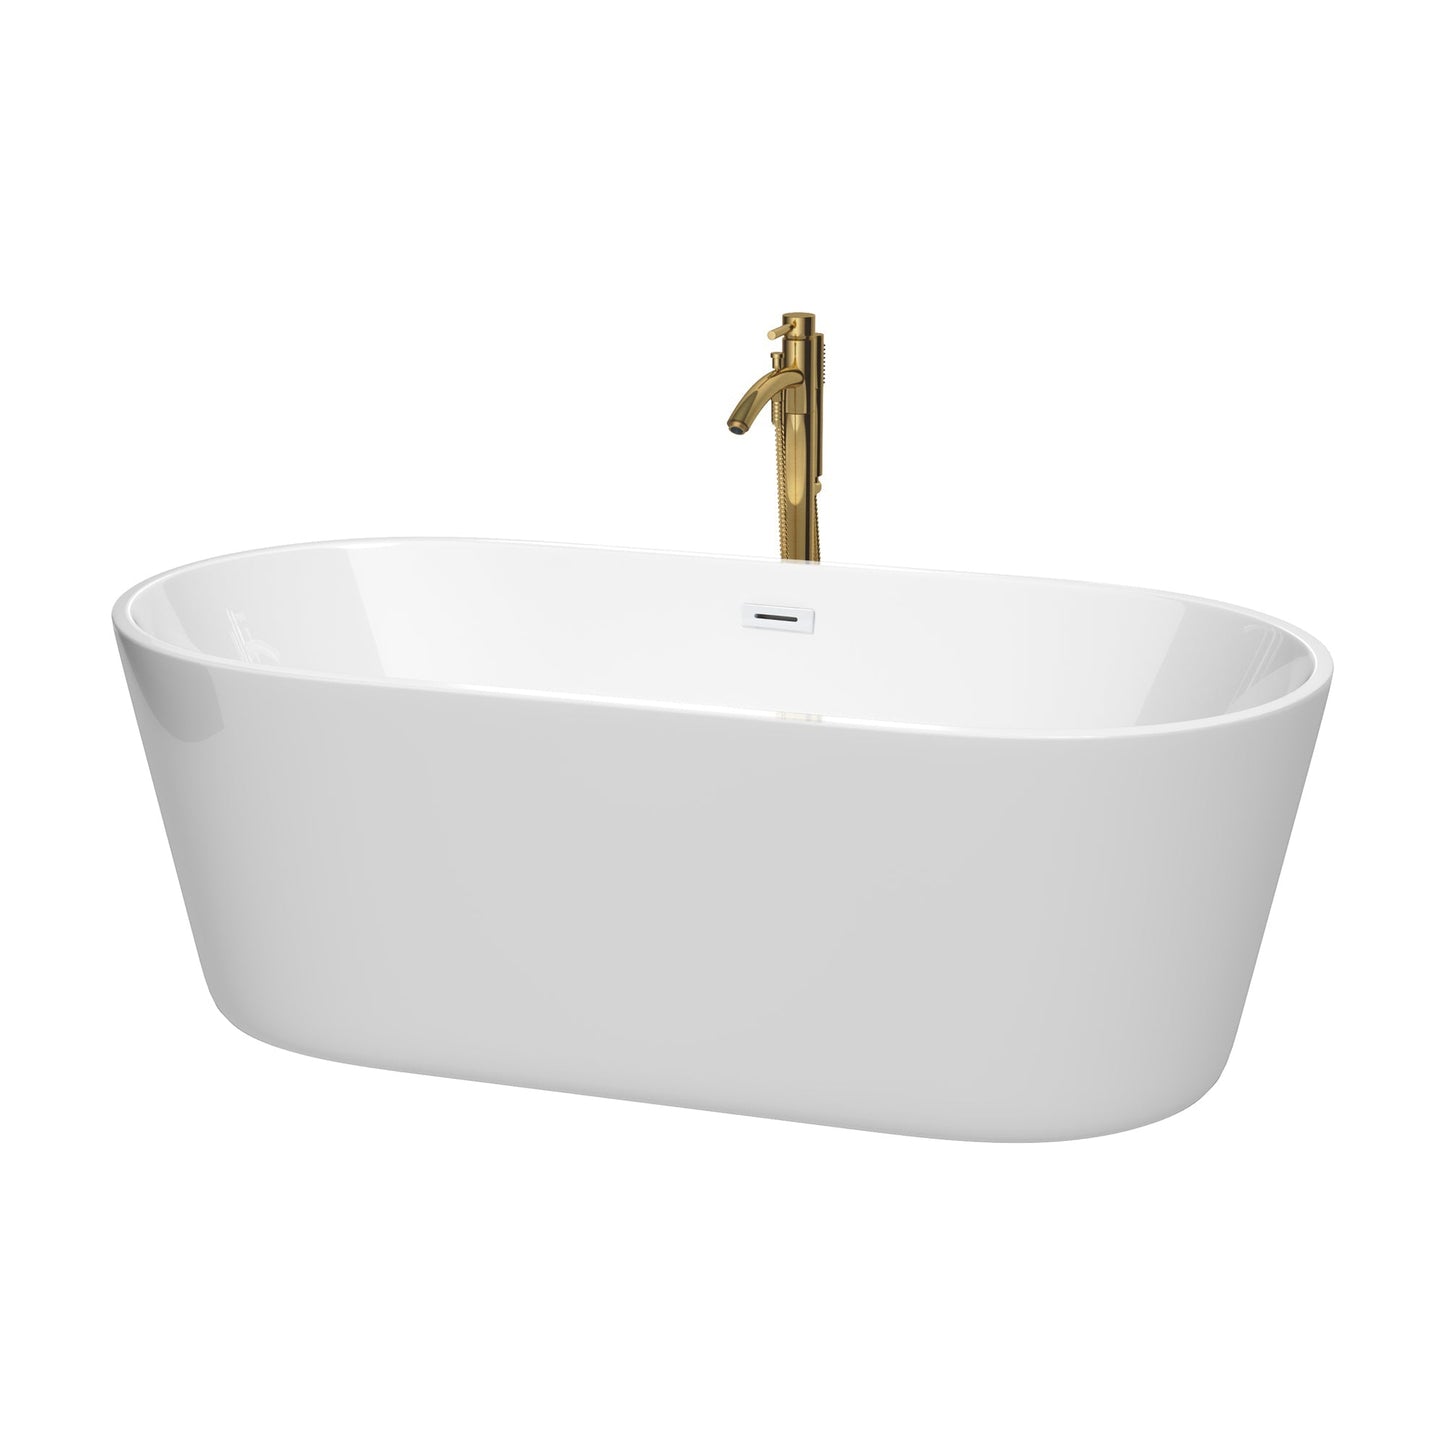 Wyndham Collection Carissa 67" Freestanding Bathtub in White With Shiny White Trim and Floor Mounted Faucet in Brushed Gold